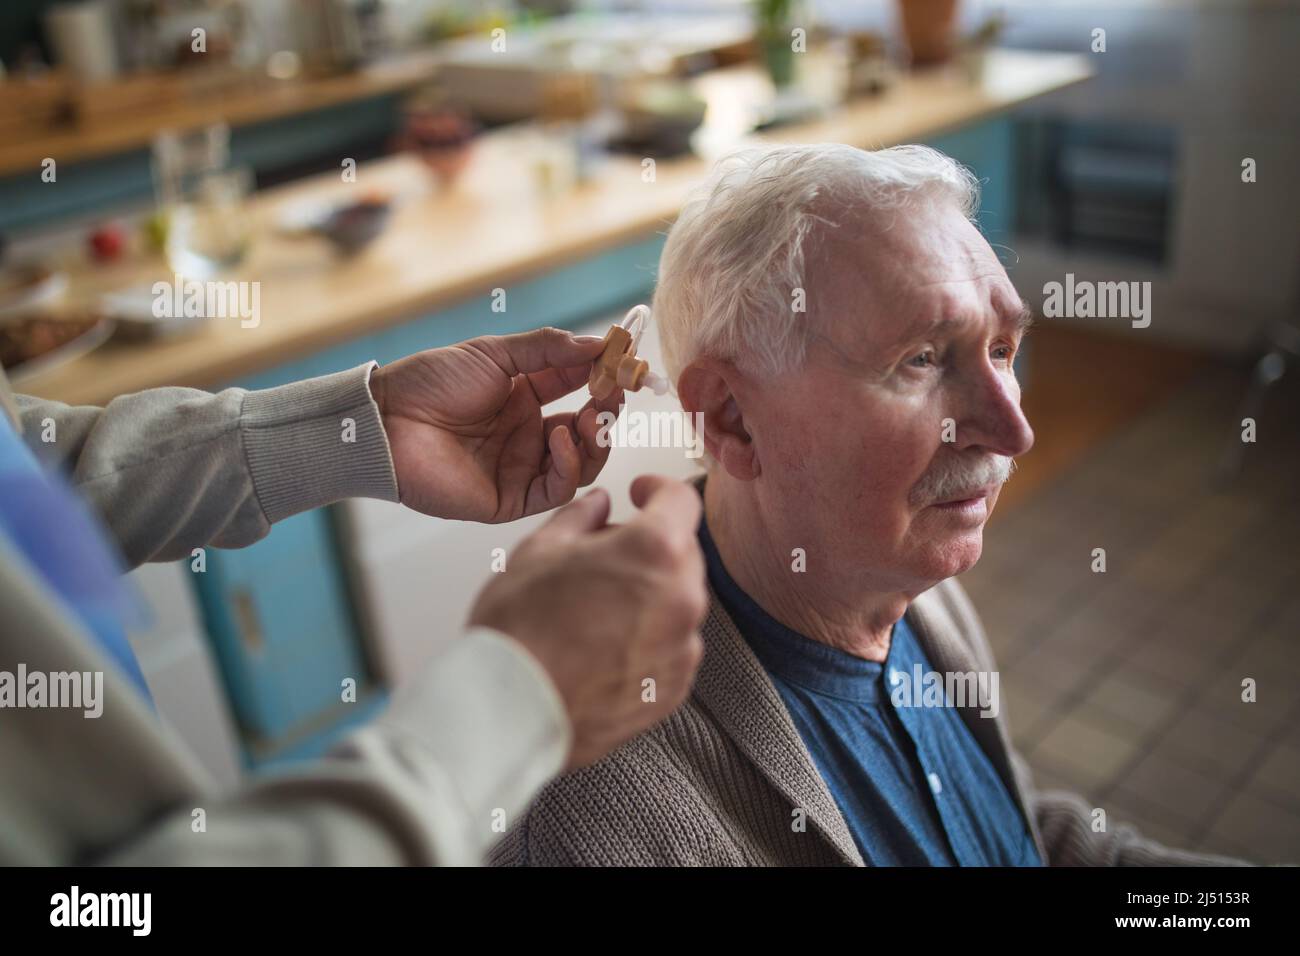 Caregiver helping senior man to insert hearing aid in his ear. Stock Photo